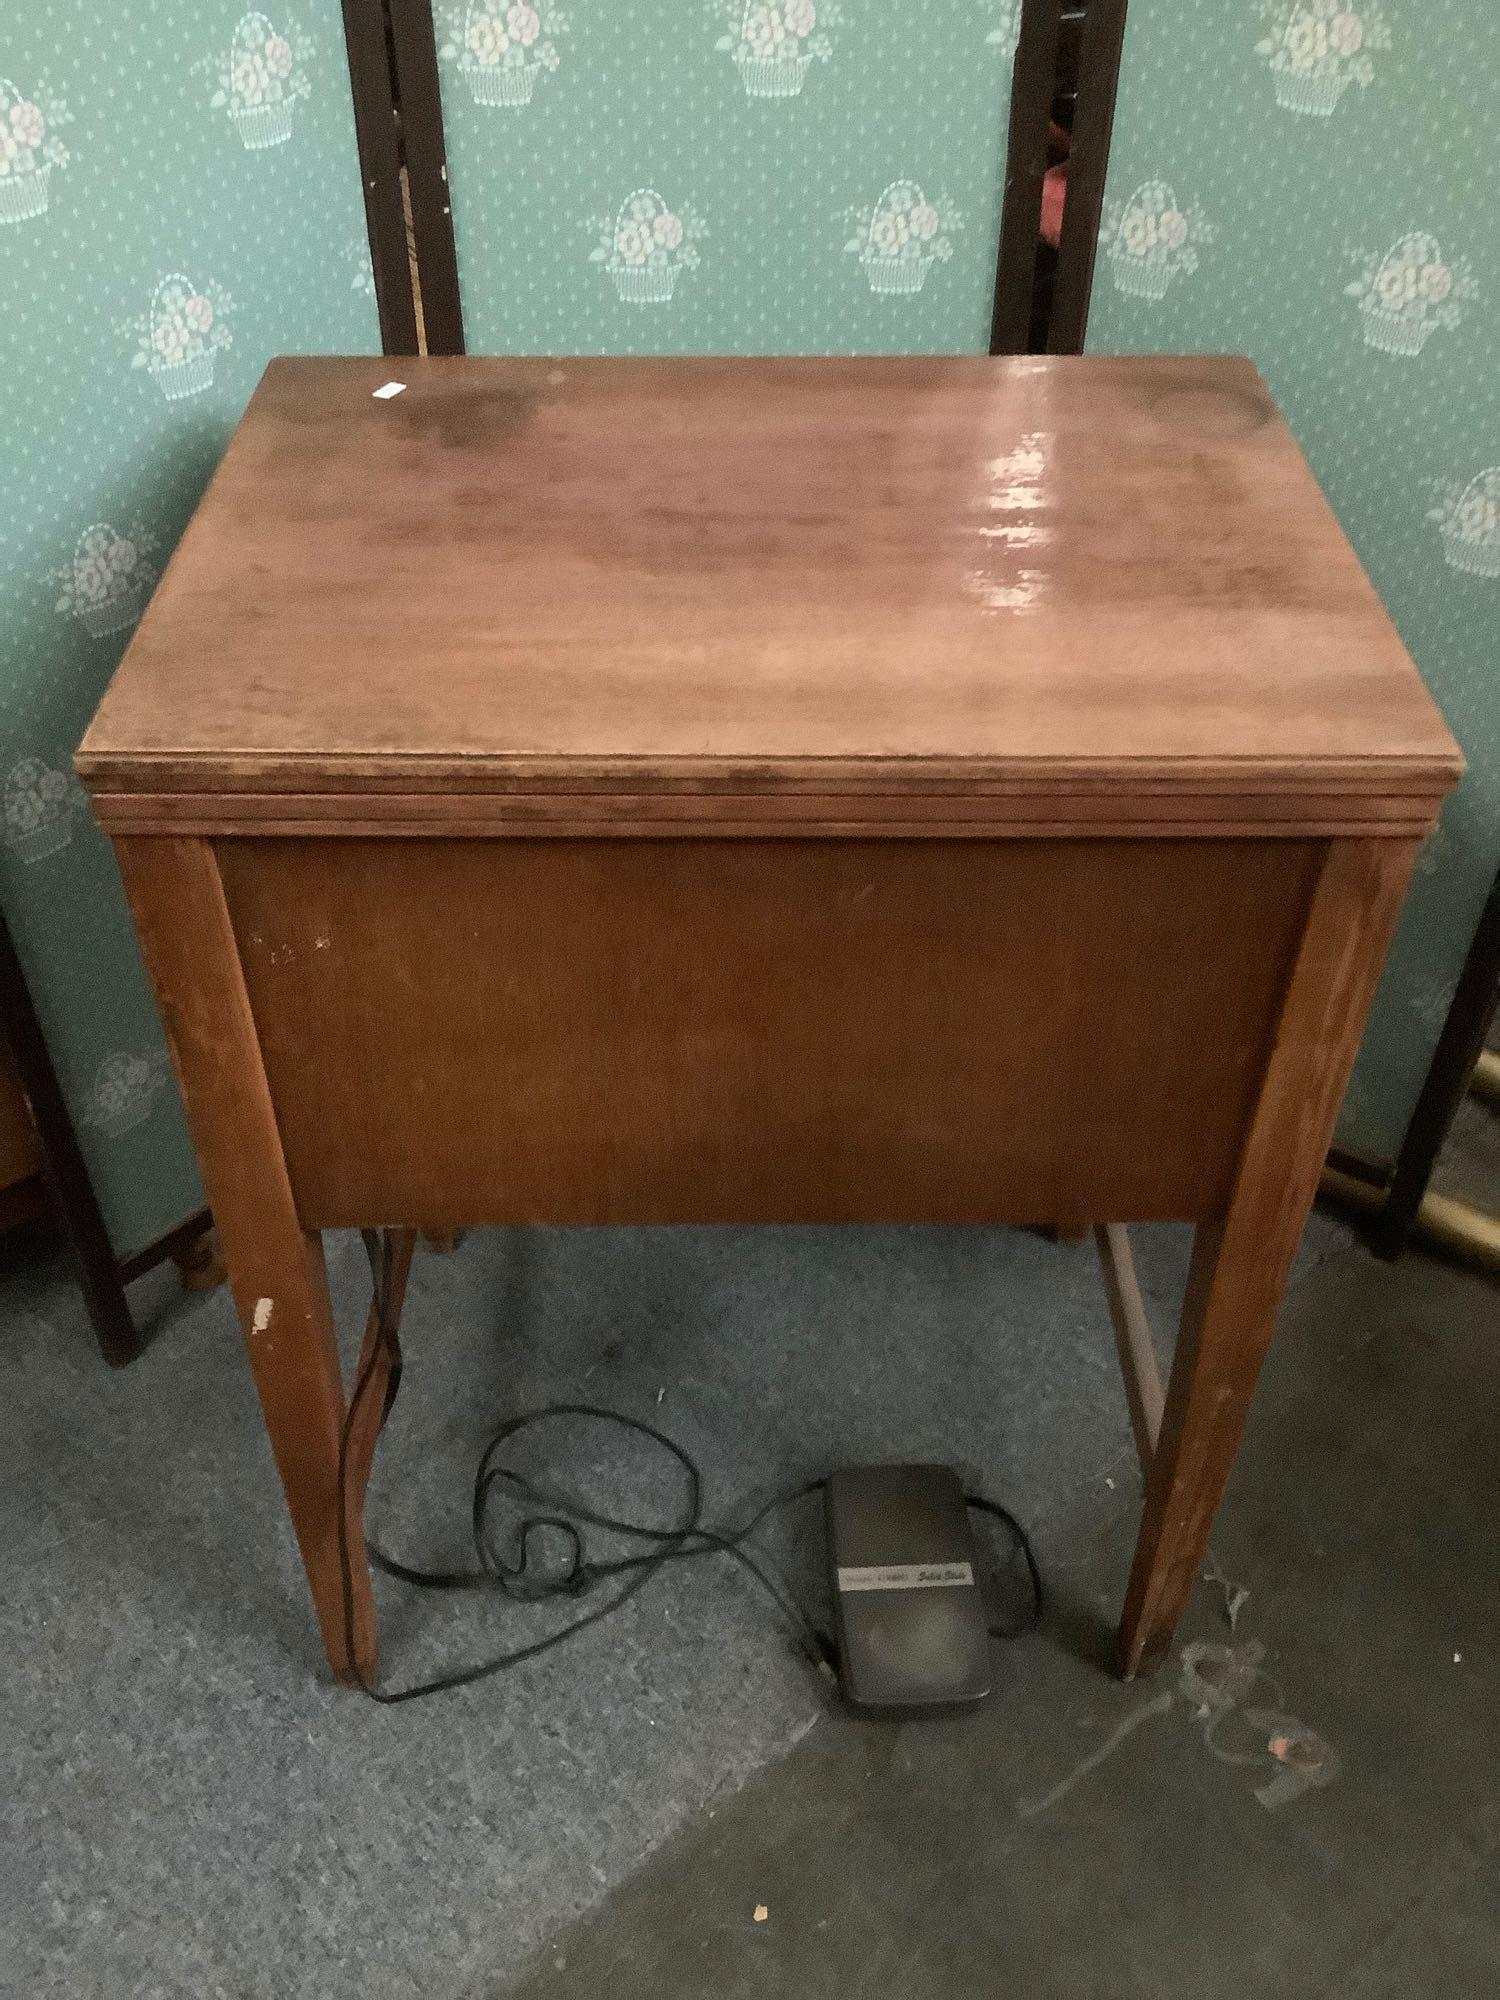 Vintage Sears Kenmore Solid State sewing machine table. Untested. approx 31x24x18 inches....